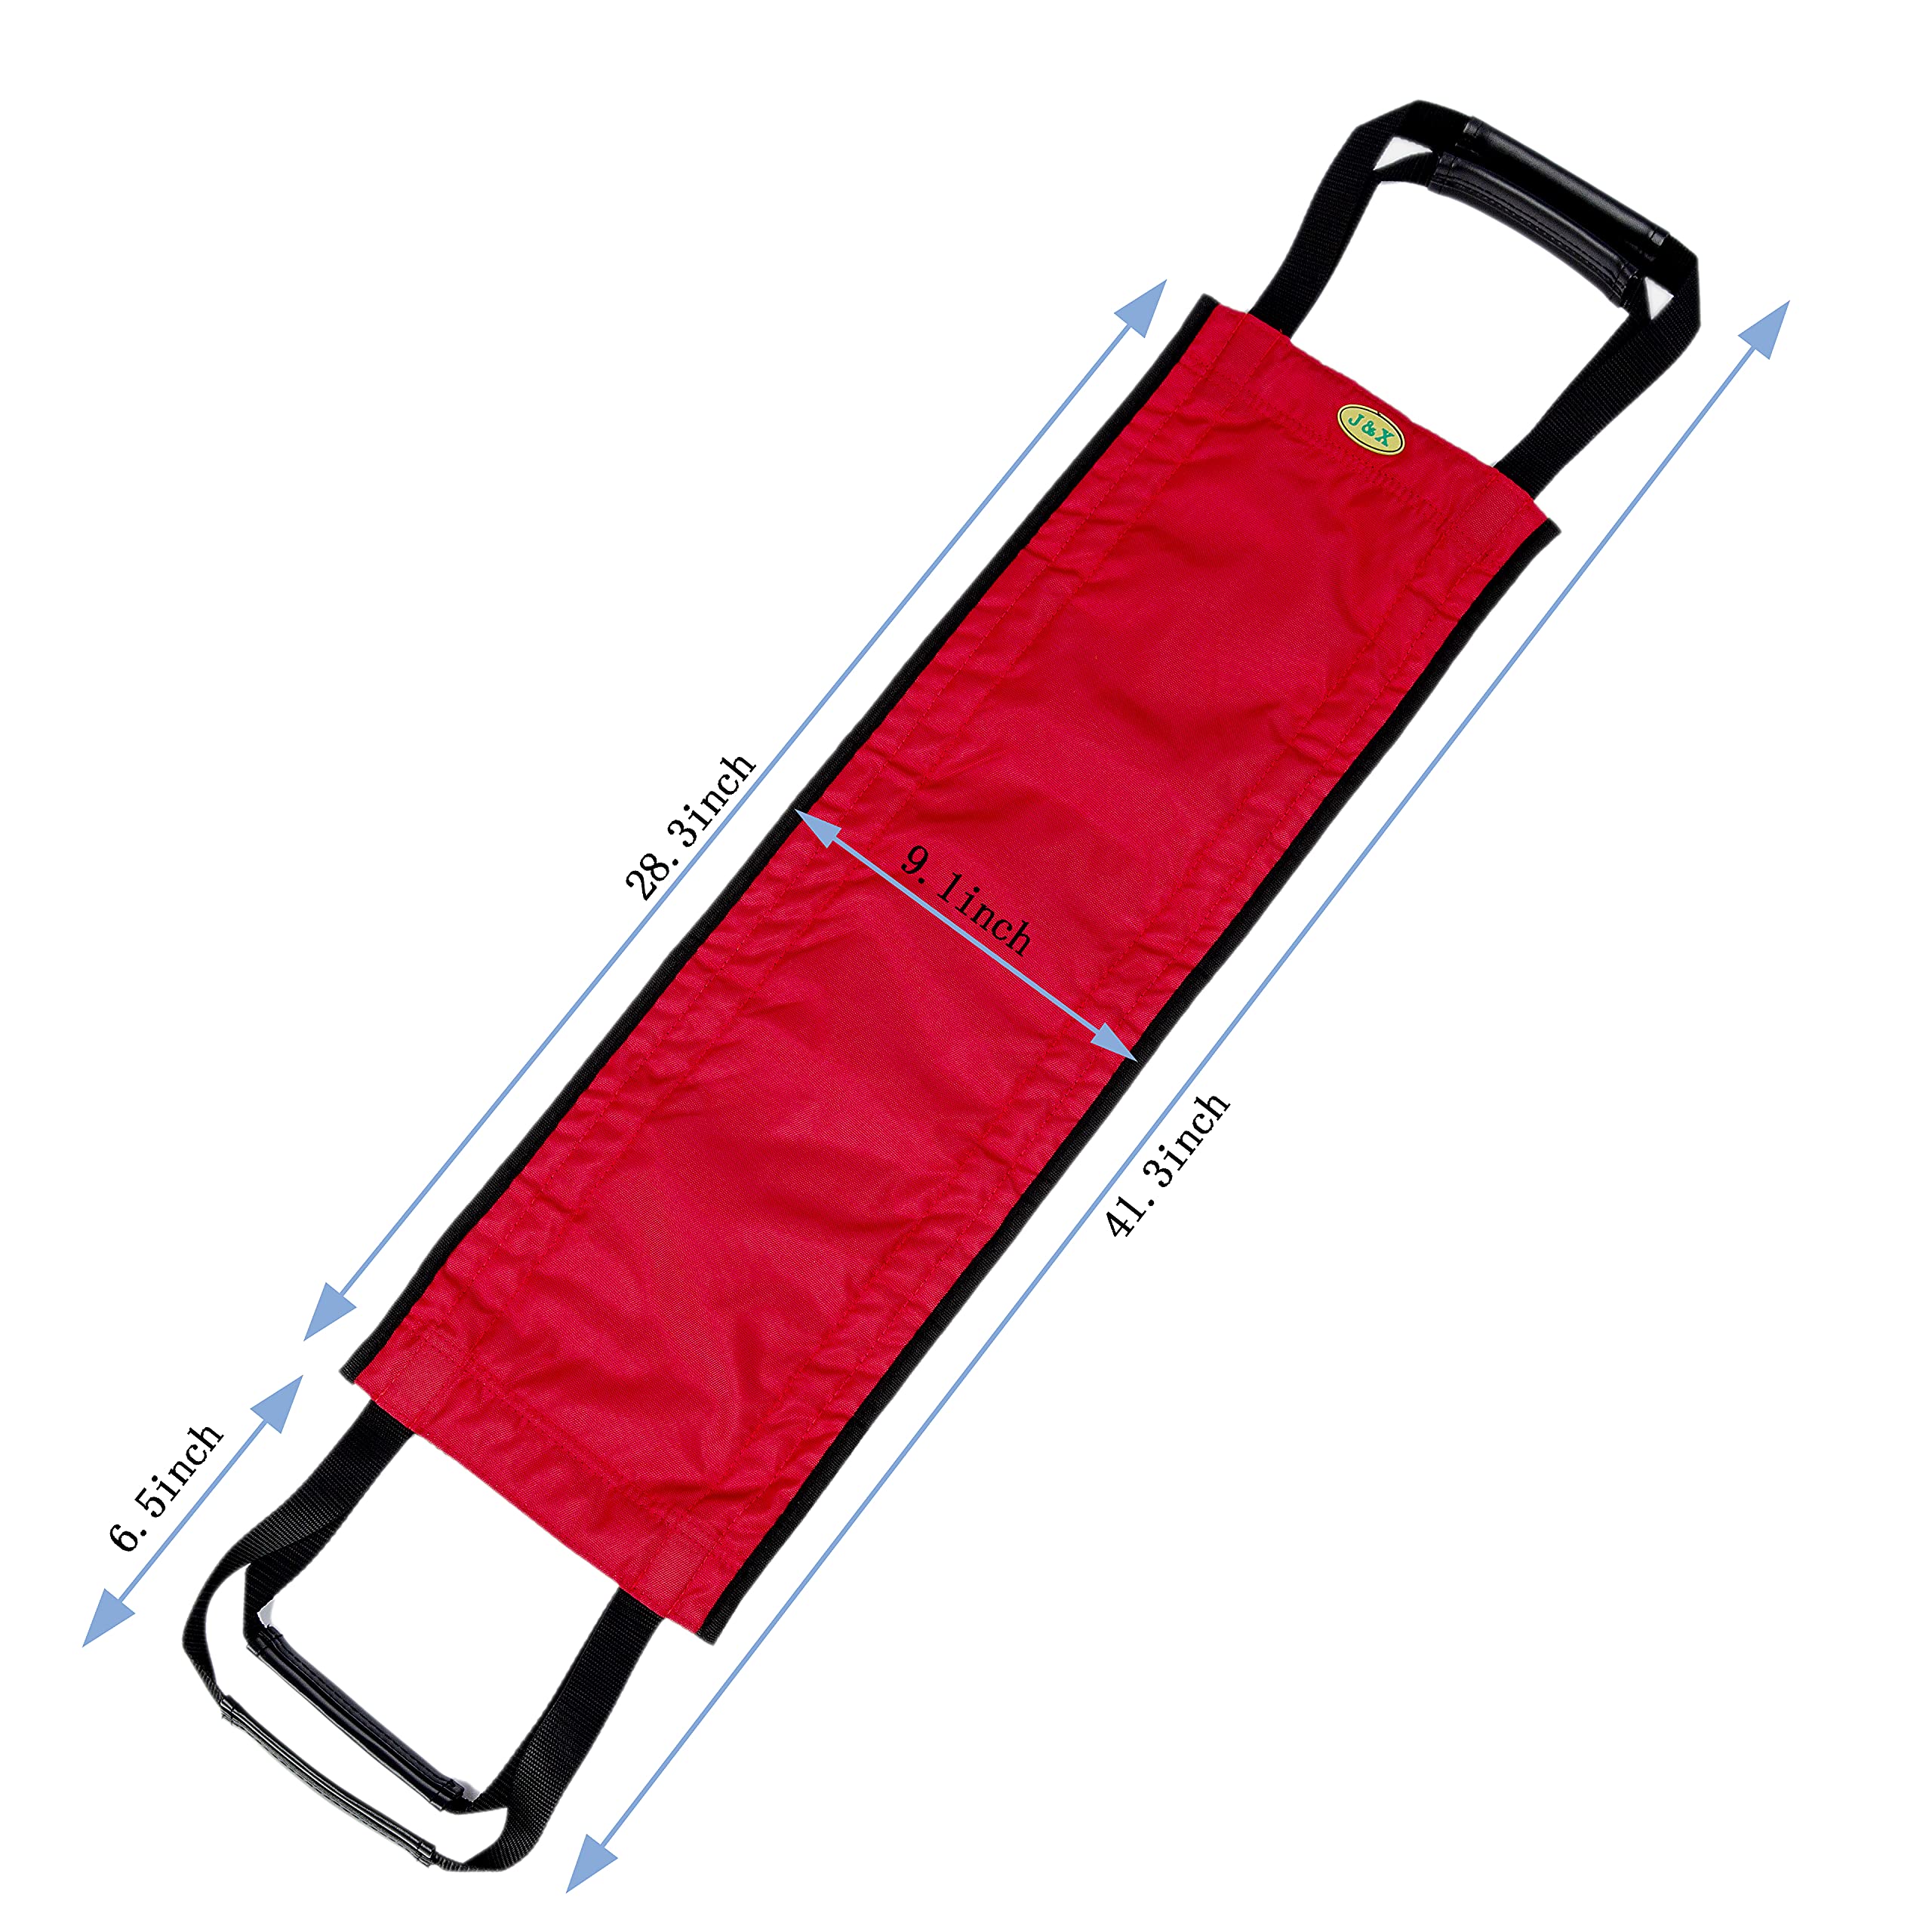 41.2 Inch Padded Bed Transfer Nursing Sling for Patient - Patient Turnin and Shift Assistant, Suitable for Bedridden Elderly, Auxiliary Products for Disabled Patients